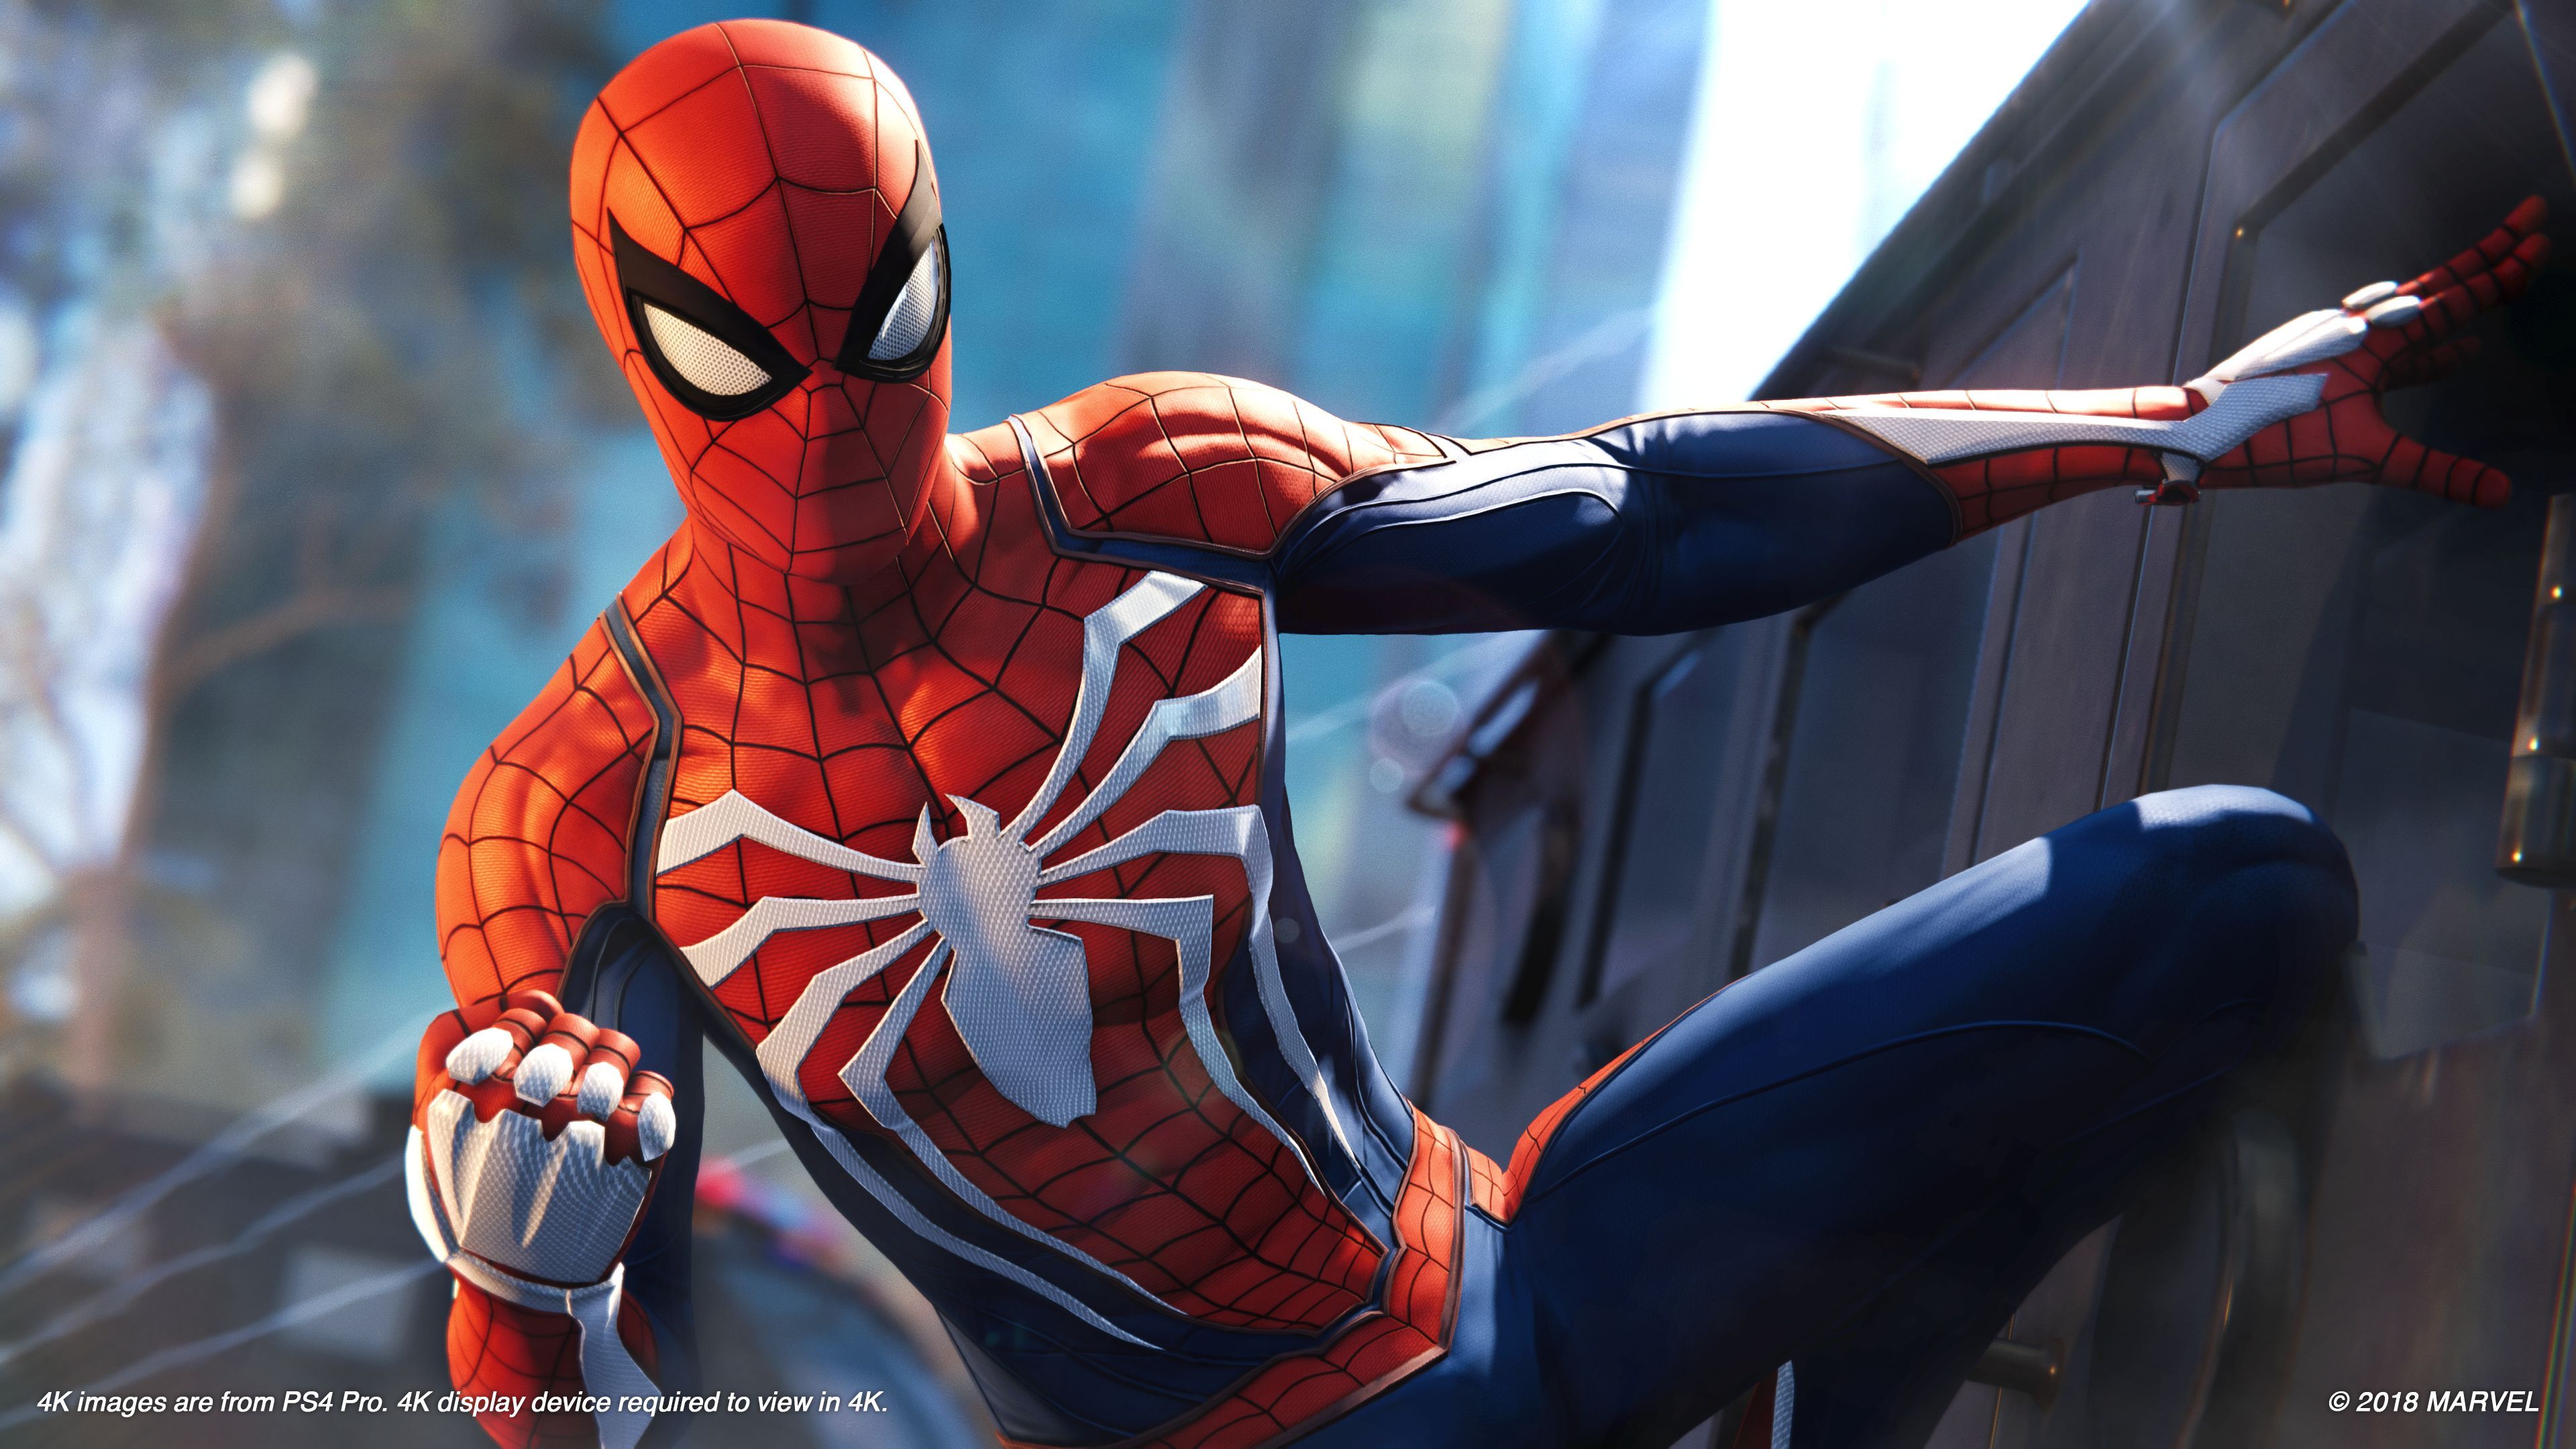 New Marvel's Spider Man High Resolution Image And Details Focus On The Game's Villains